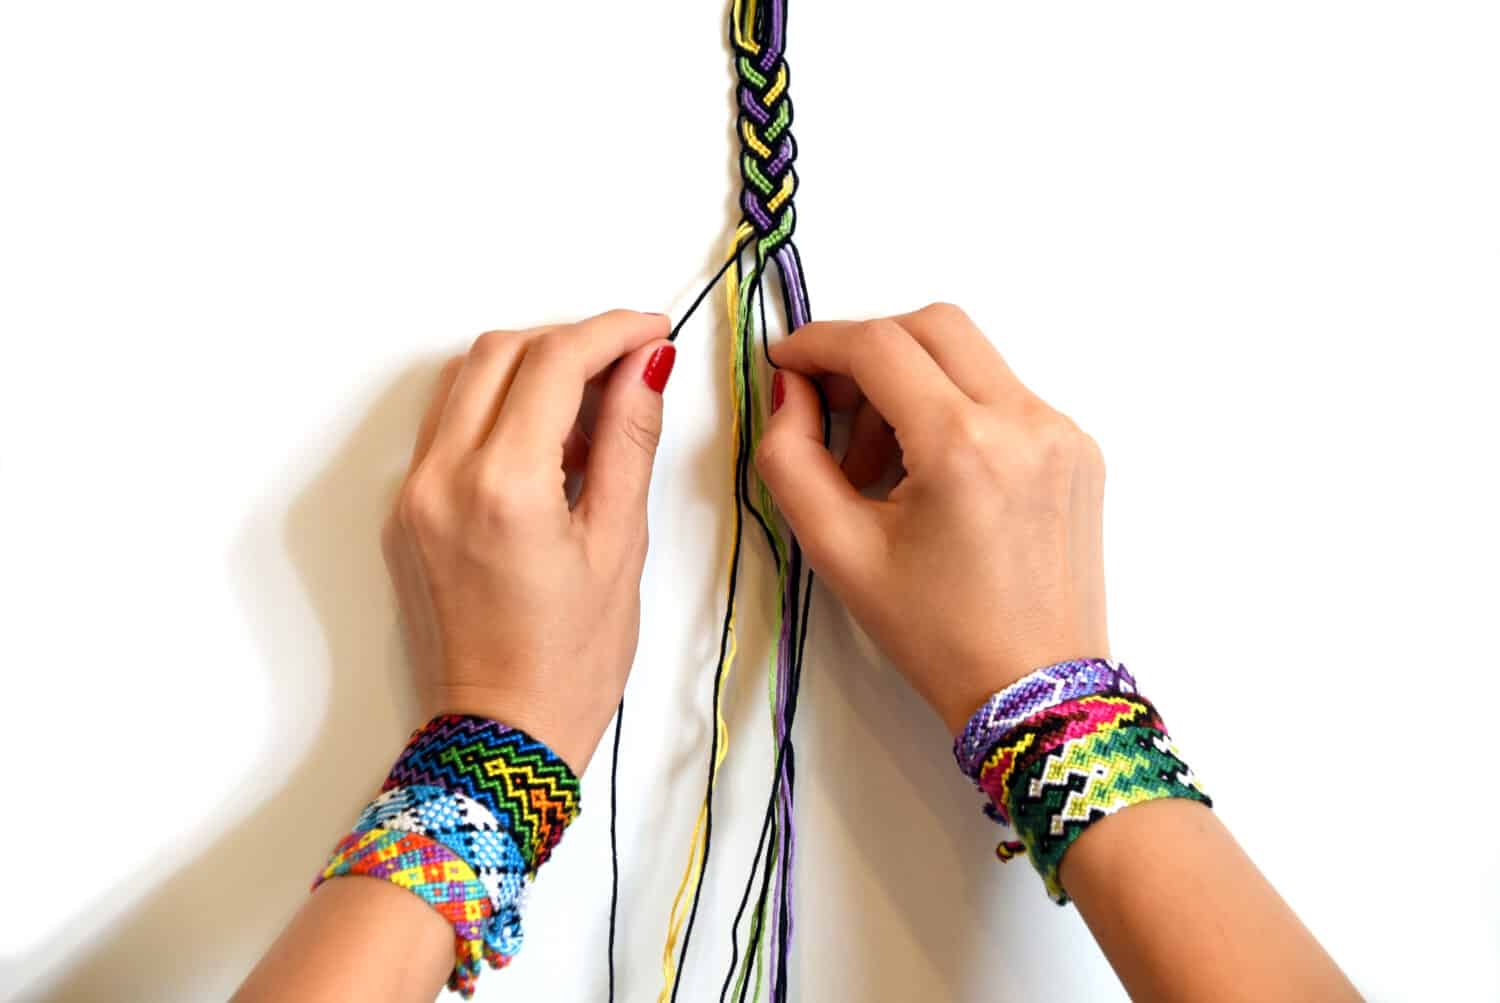 Process of weaving knot for DIY friendship bracelet Pigtail. Female hands with many handmade bracelets on wrists. step by step. White background with copy space